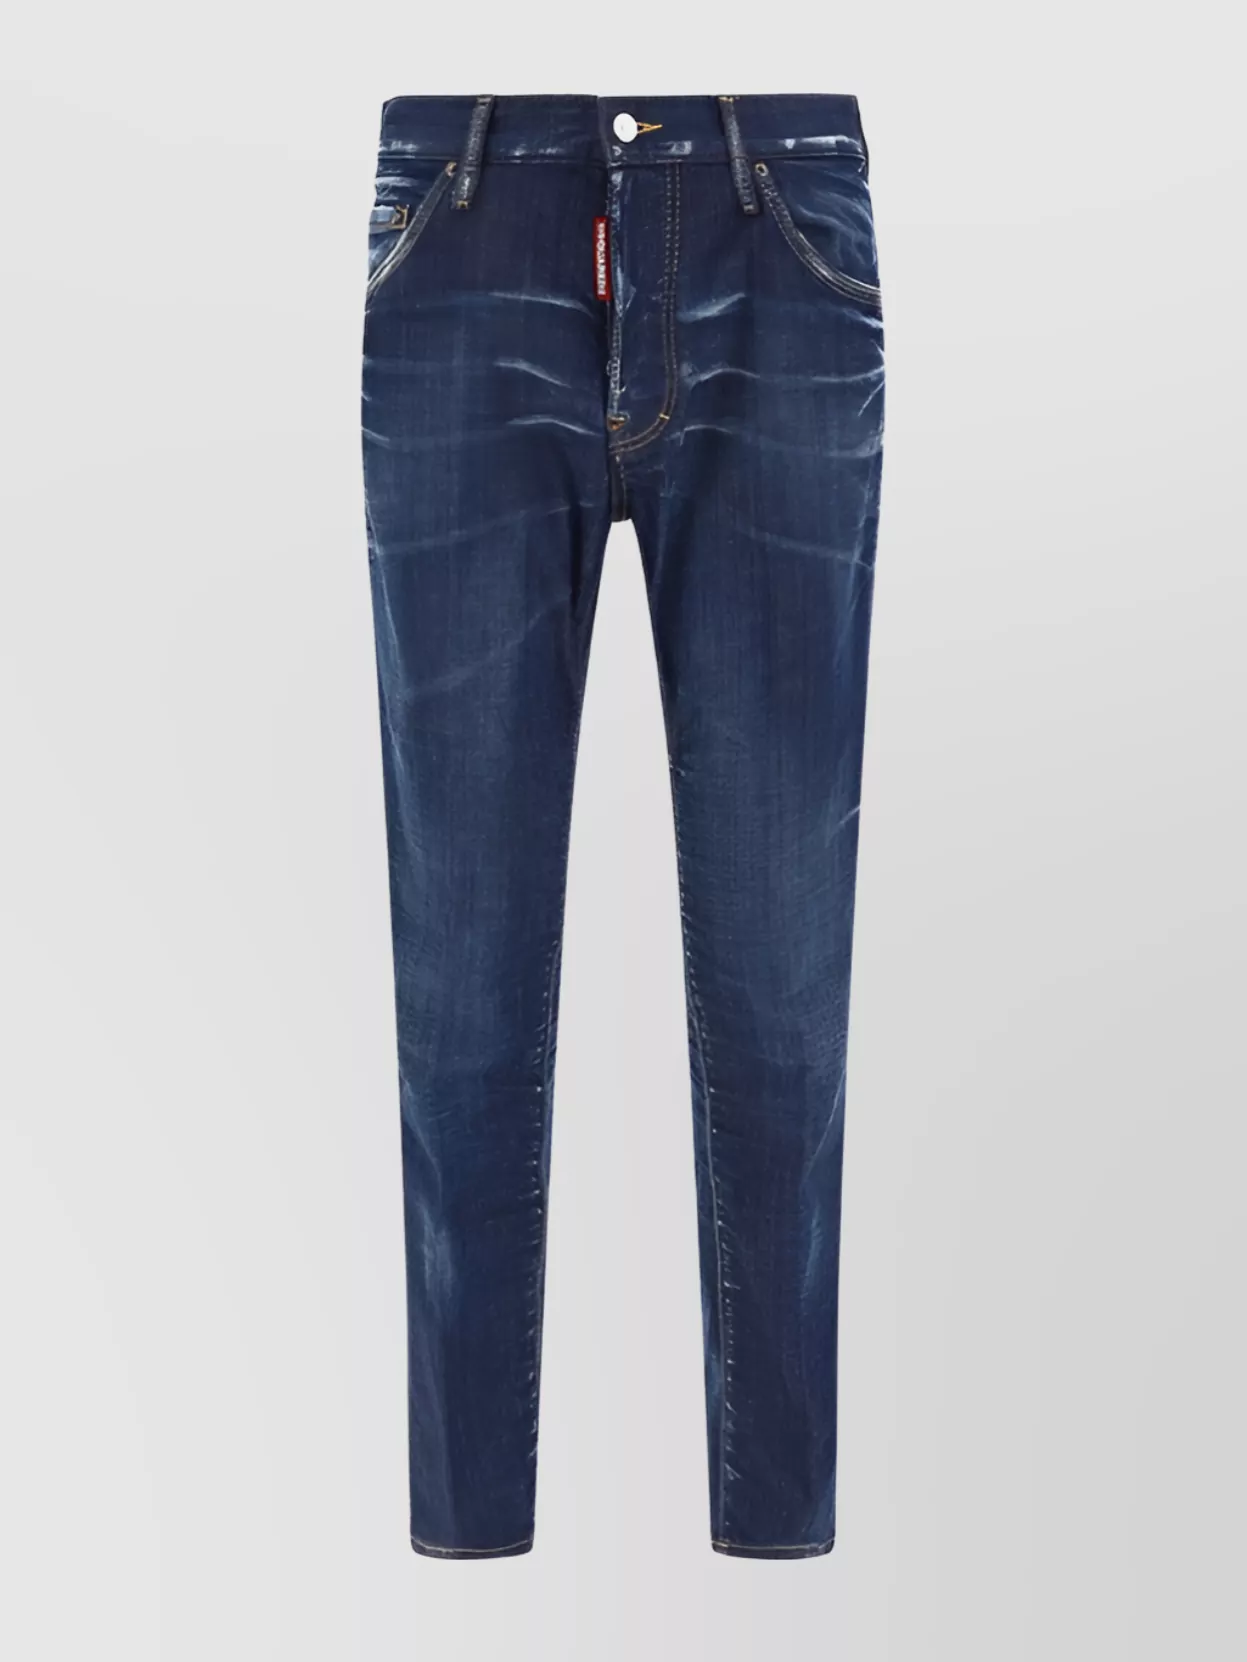 Dsquared2 Straight Style Denim Trousers With Contrast Stitching In Blue